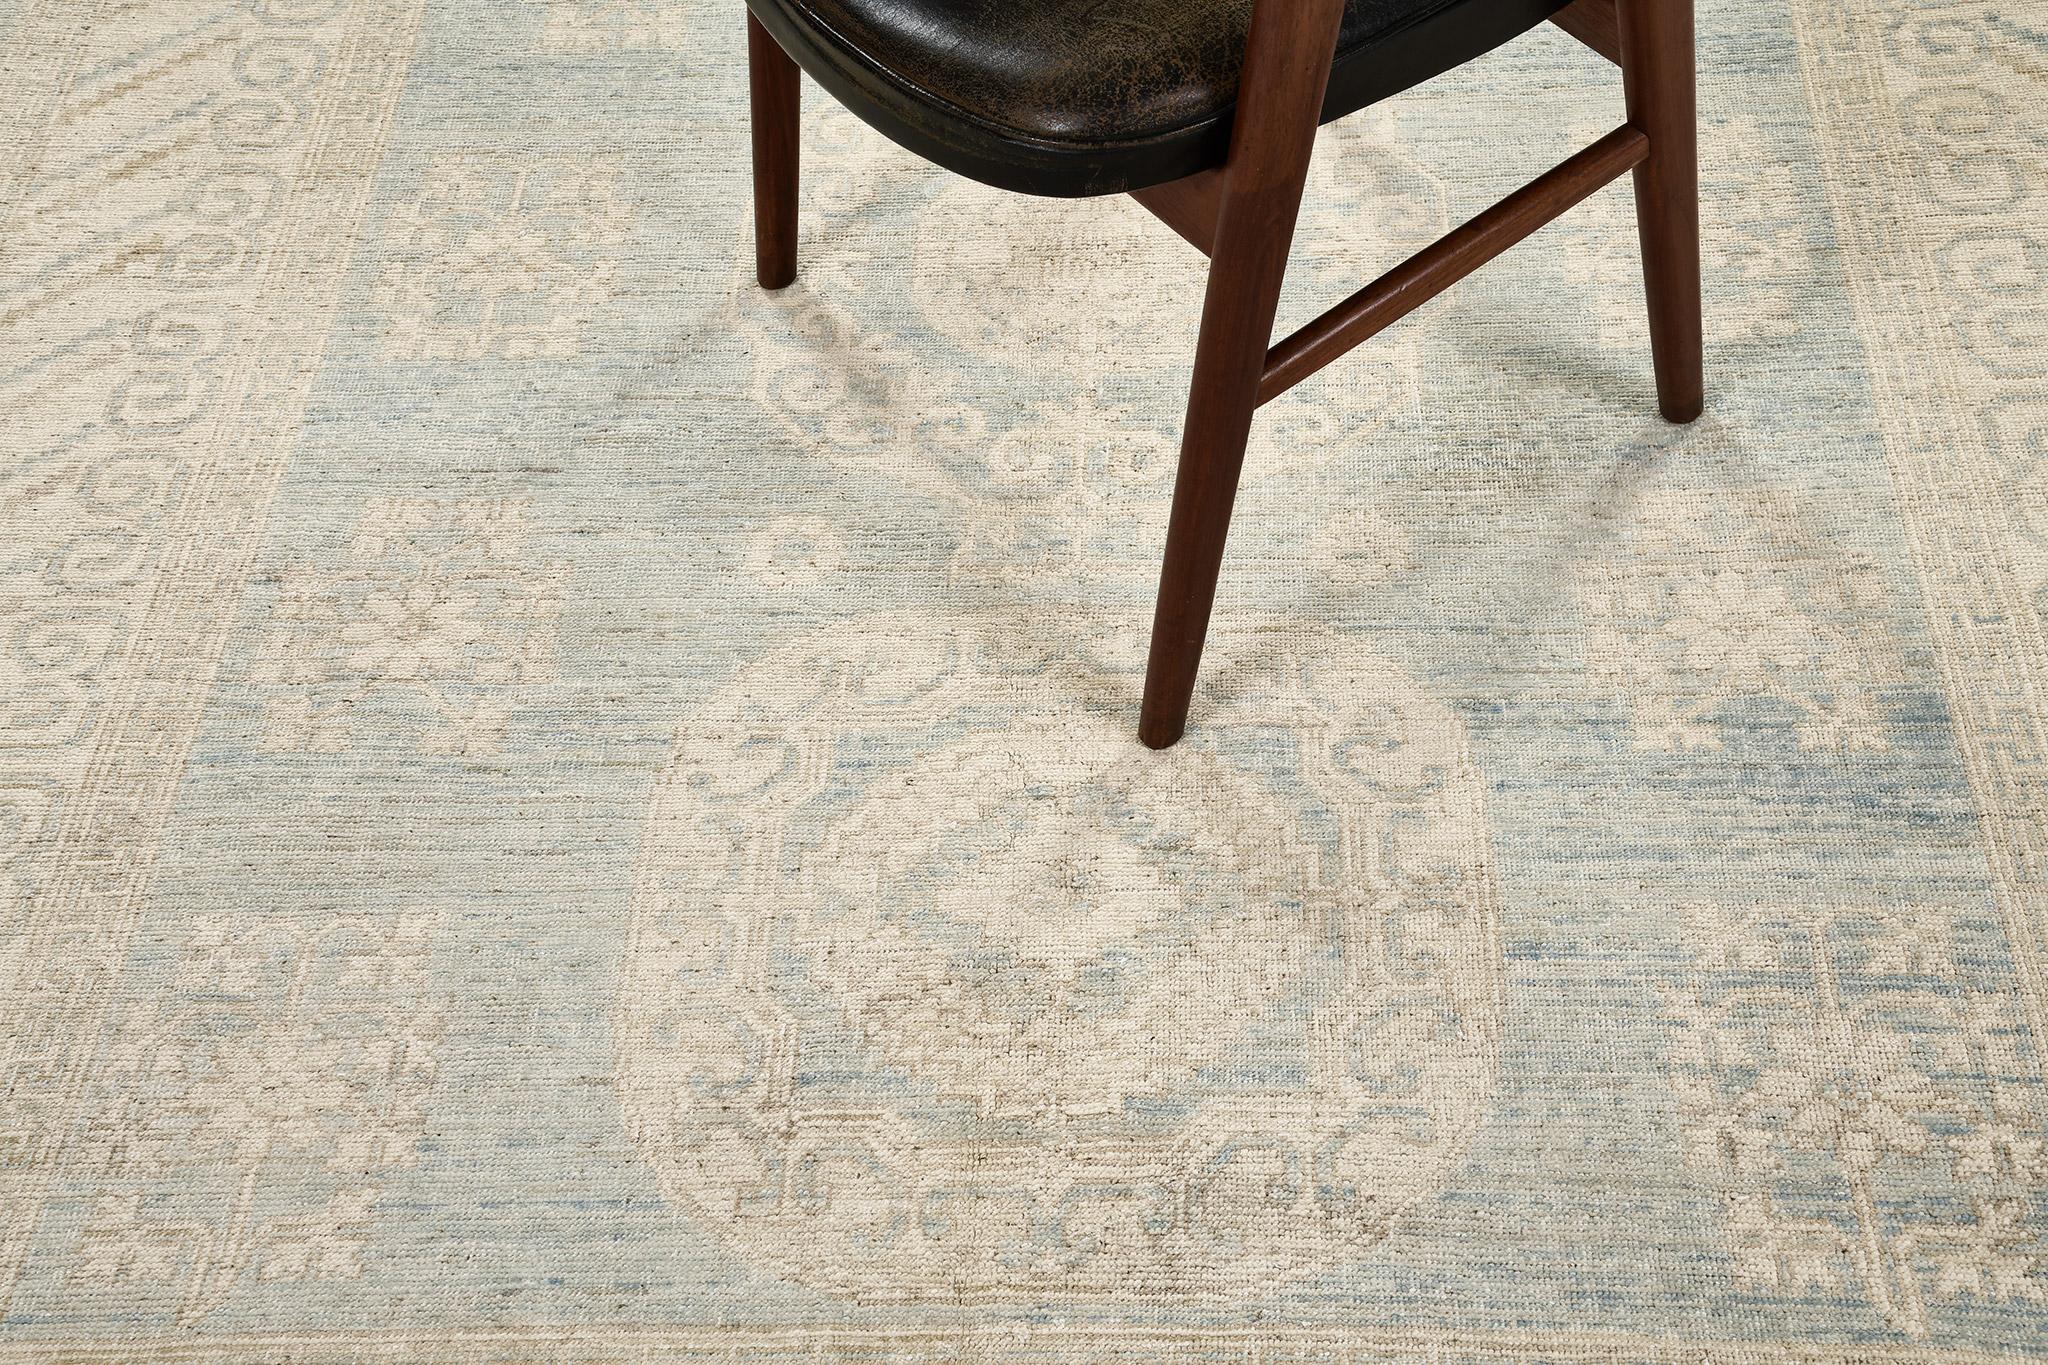 A spectacular revival of Khotan design rug in the soothing muted tones of sky blue, sand and gold. This sophisticated rug features three ornately designed medallions surrounded by blooming florid elements in a tranquil abrashed field. With its